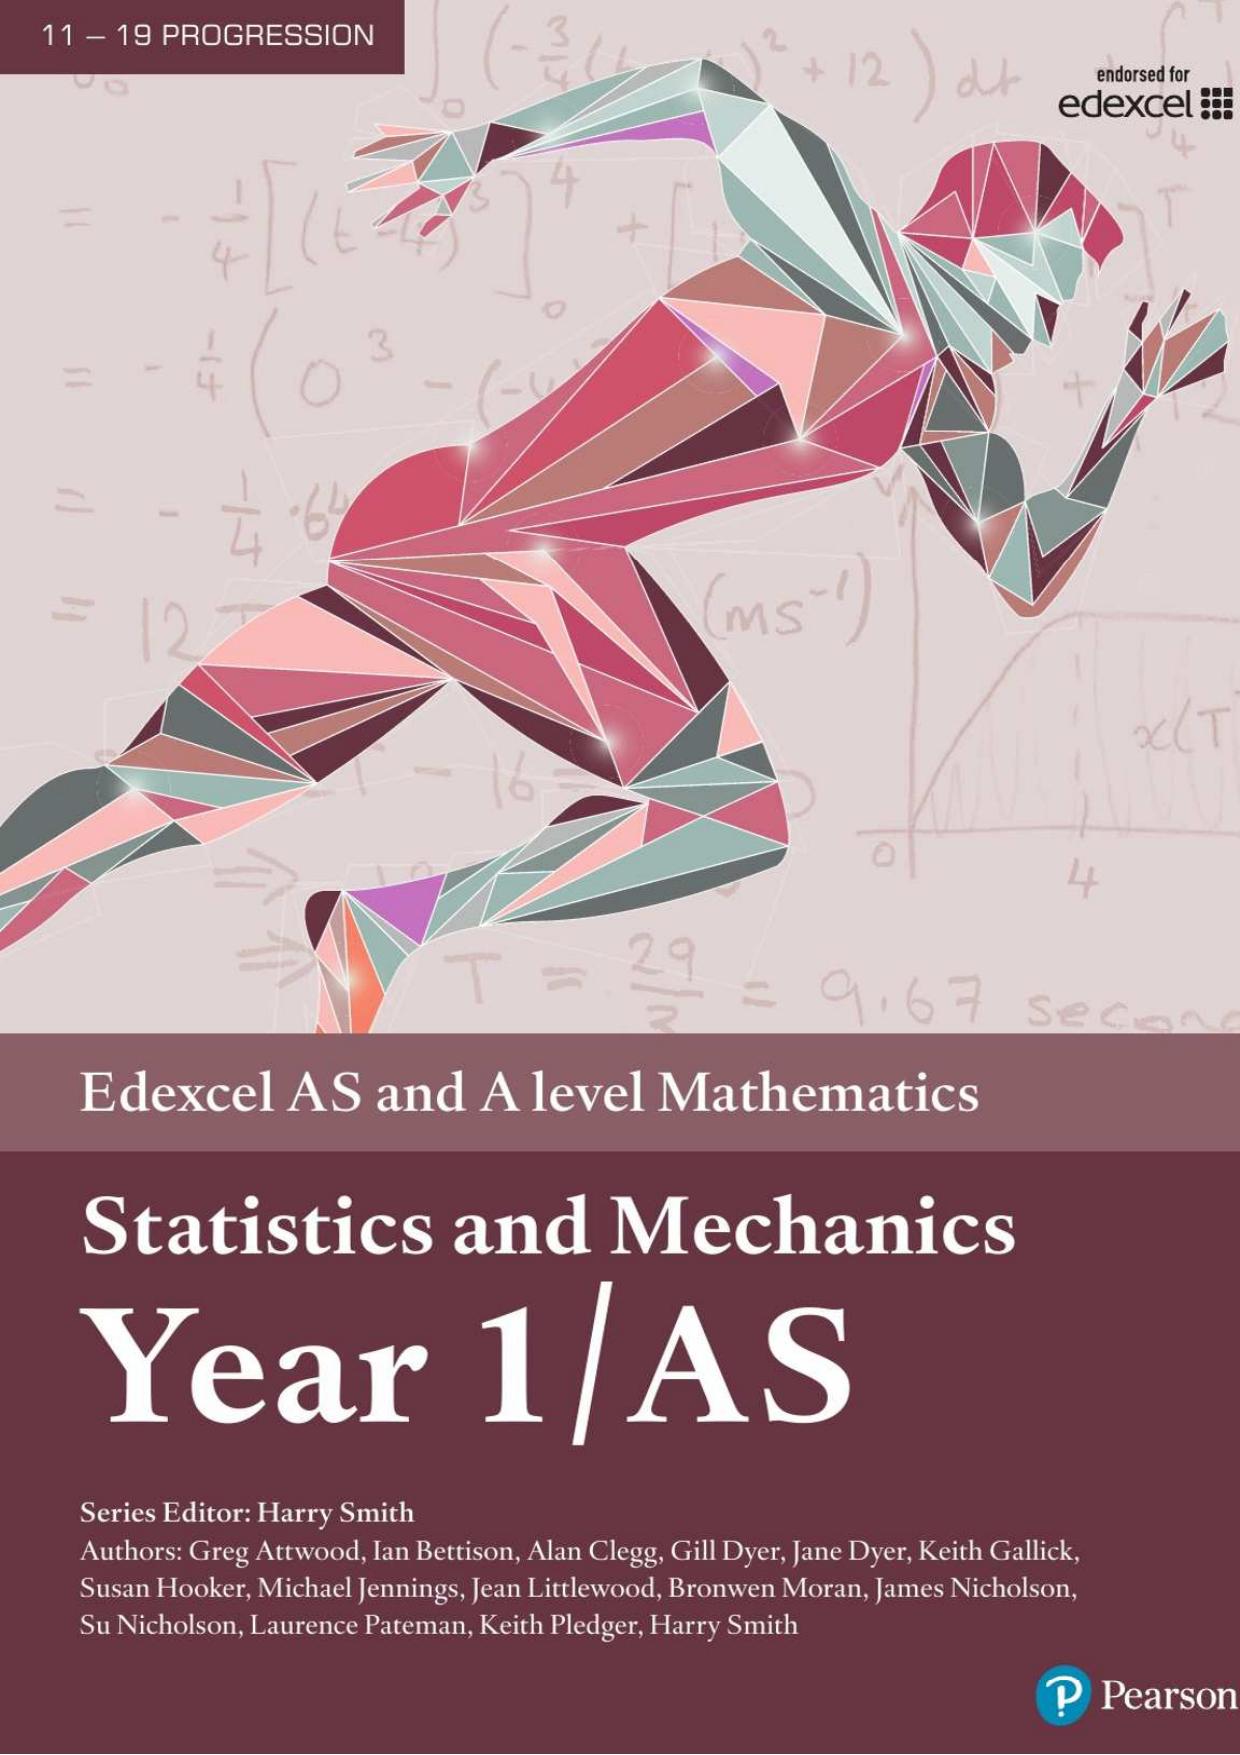 Edexel AS and A level Mathematics - Statistics and Mechanics - Year 1/AS